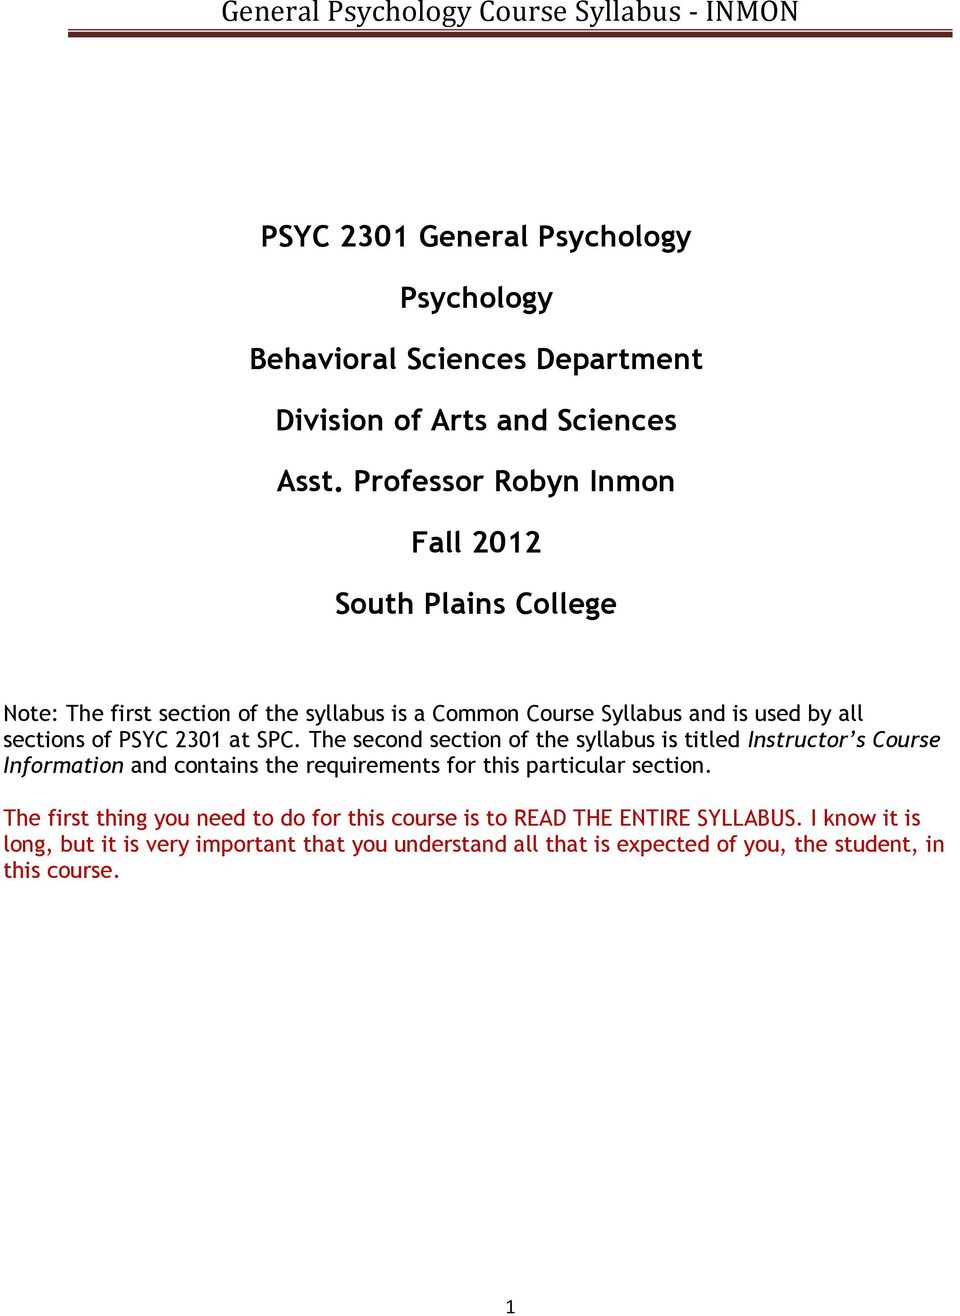 PSYC 2301 at SPC. The second section of the syllabus is titled Instructor s Course Information and contains the requirements for this particular section.